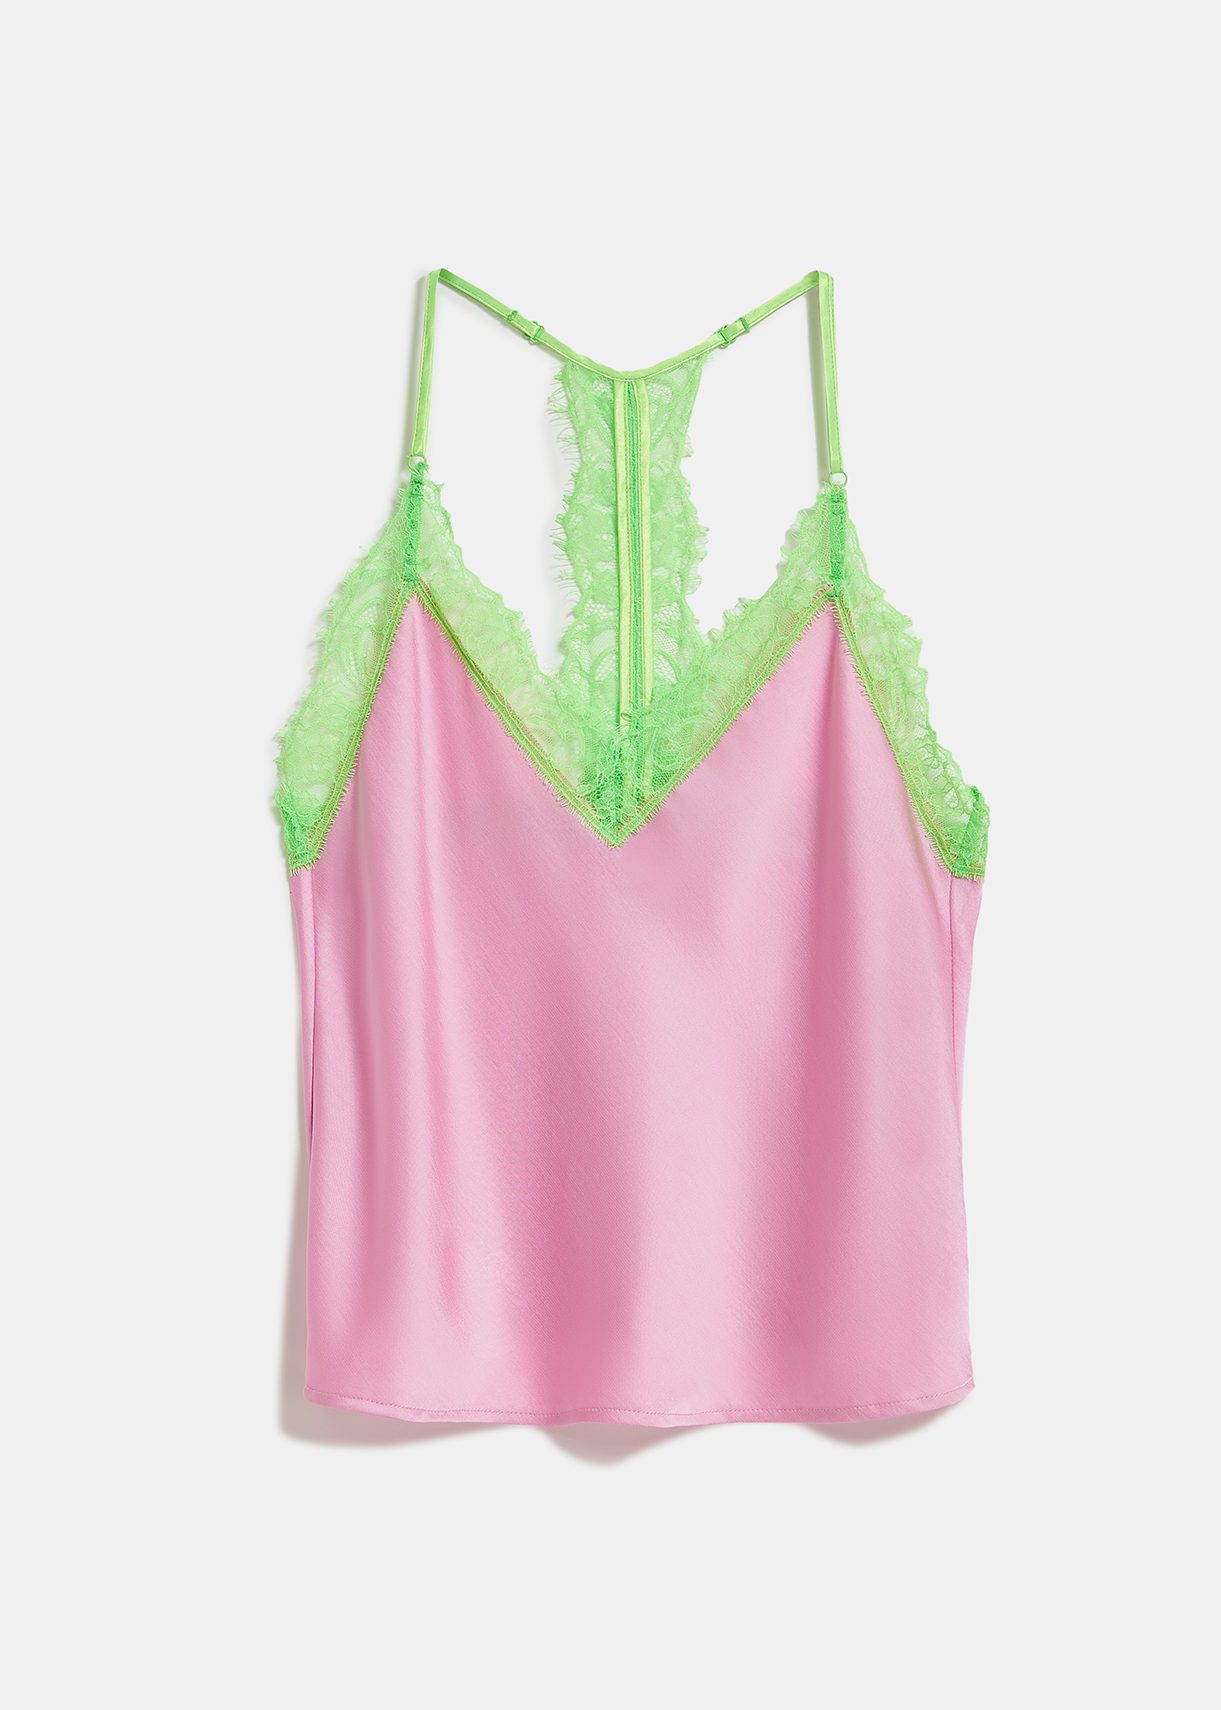 Light pink camisole with neon green lace trimmings